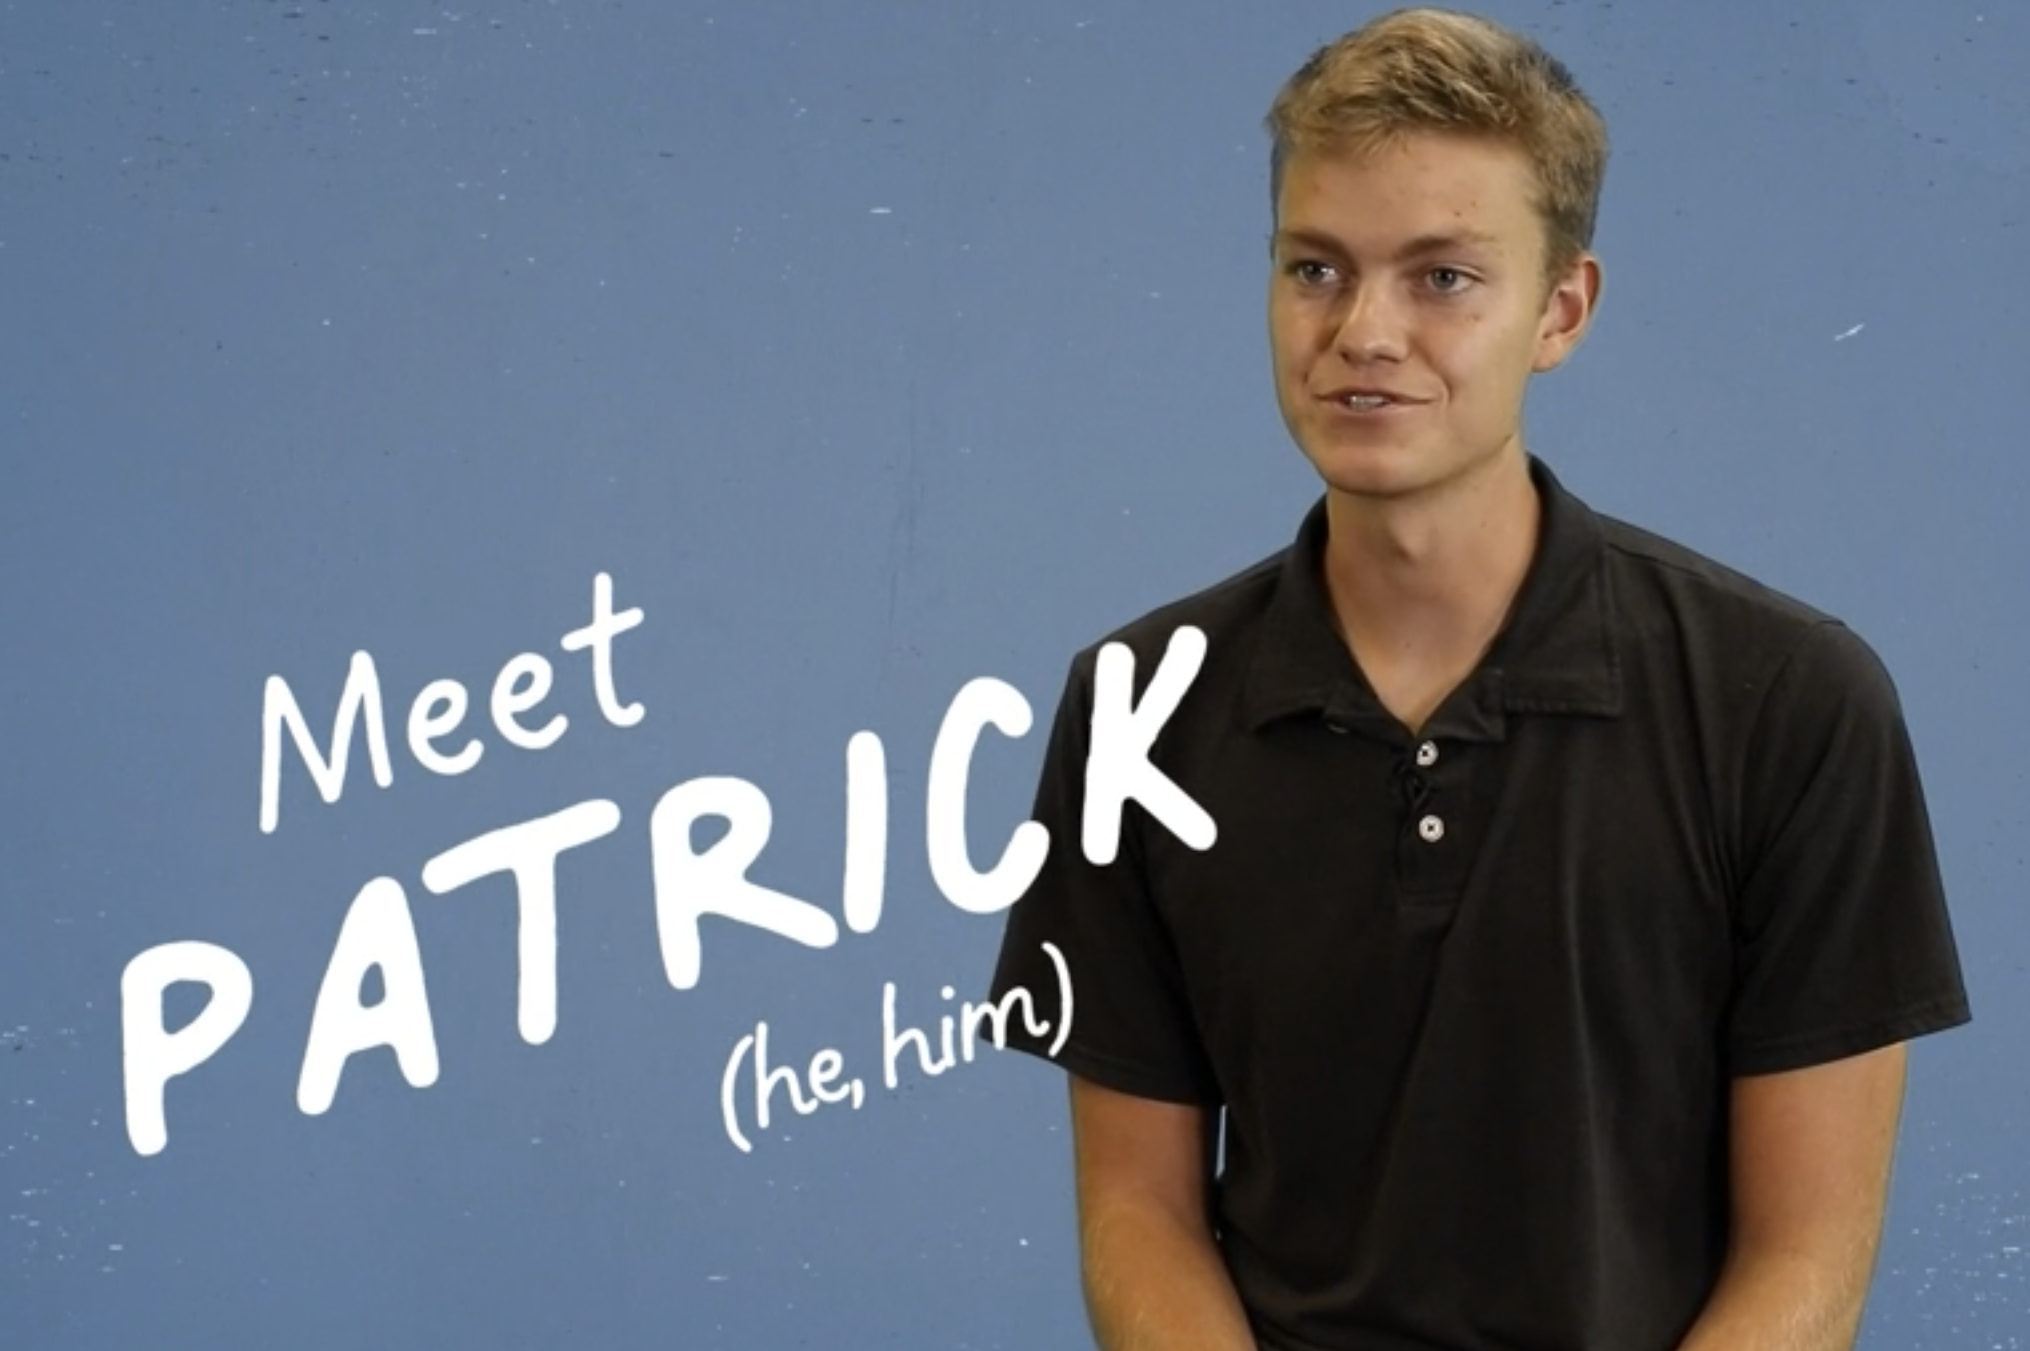 Patrick (he/him) is majoring in political science and global studies.